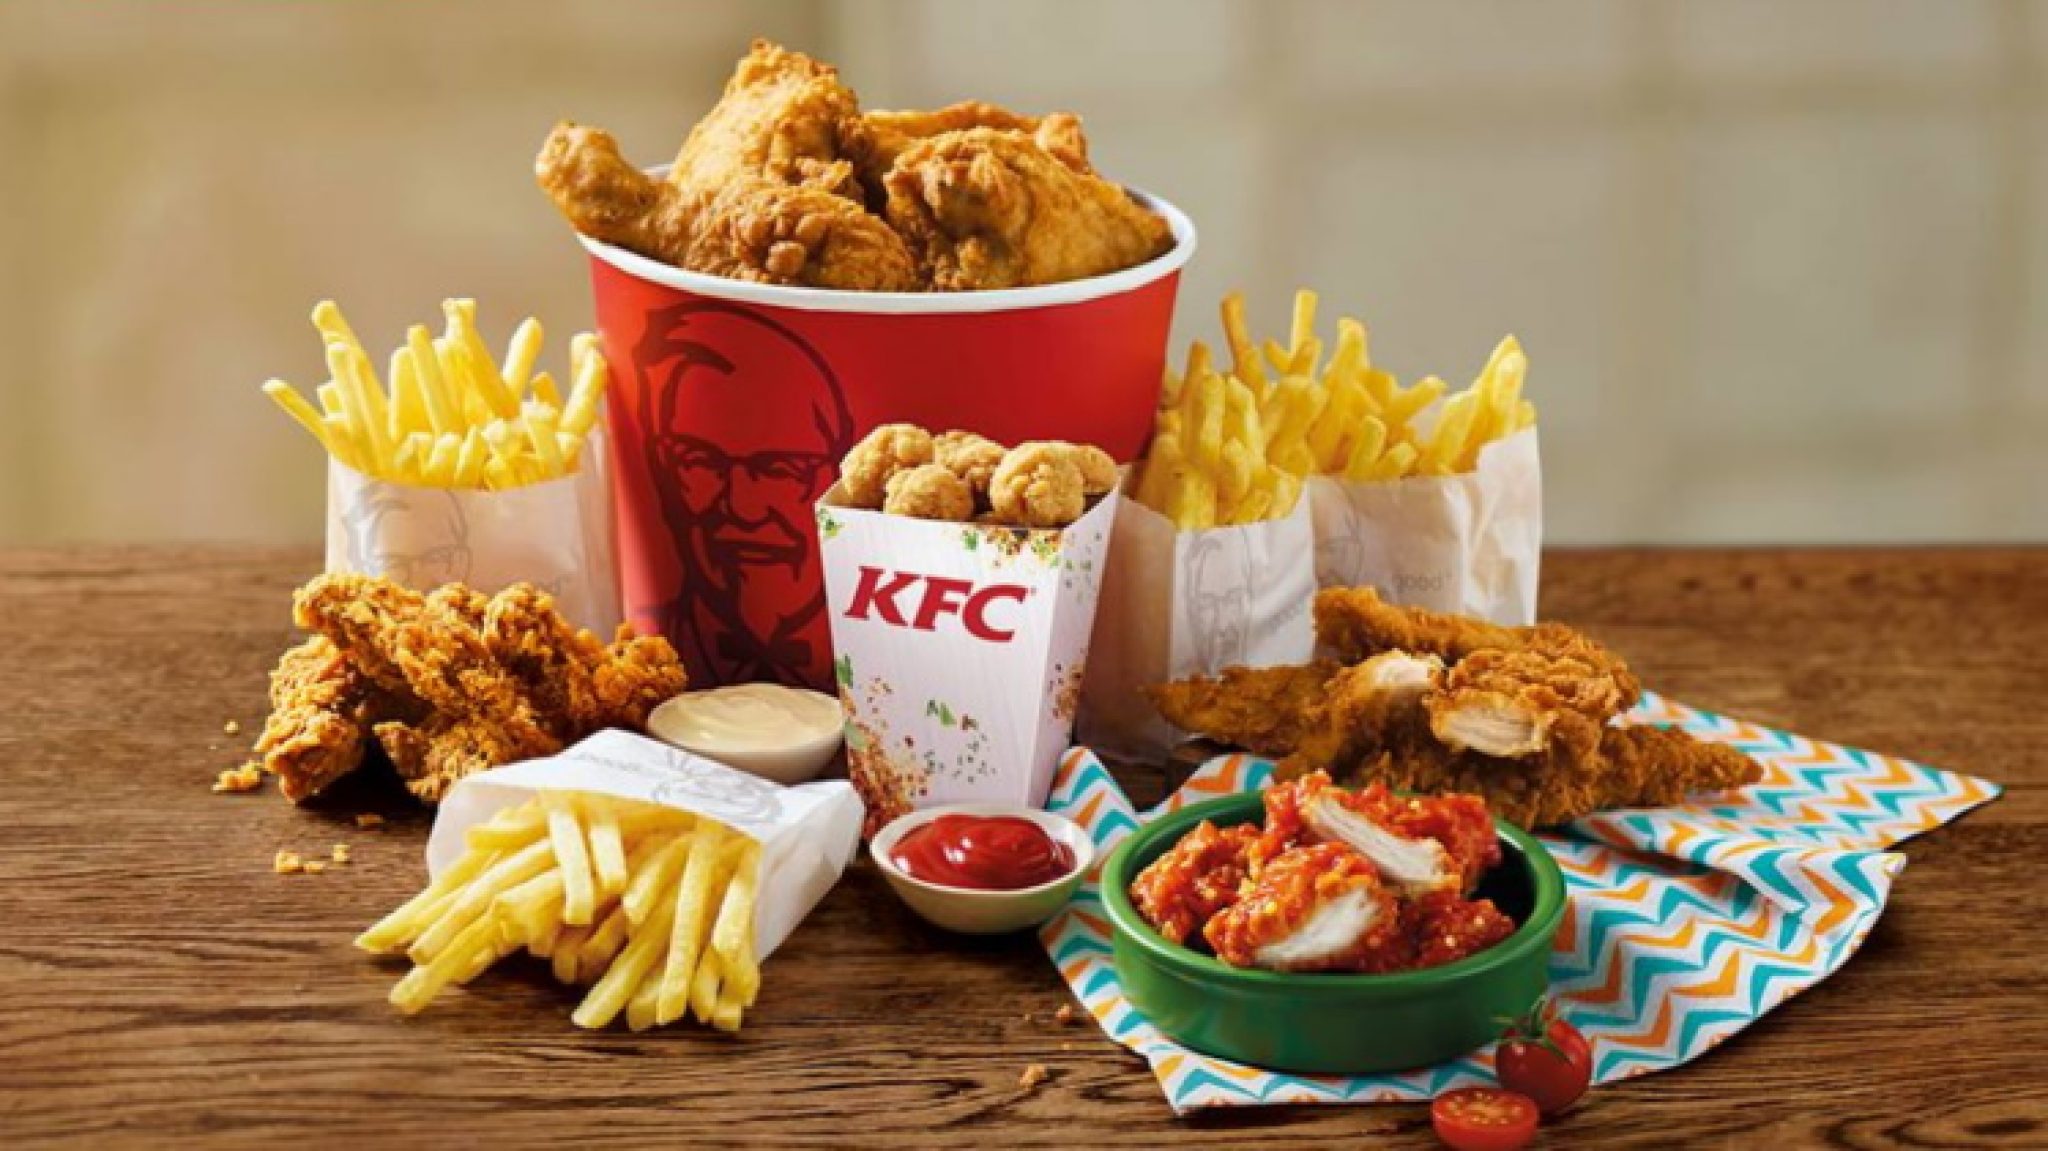 KFC Best Military Discounts for 2021! Forces Discount Offers